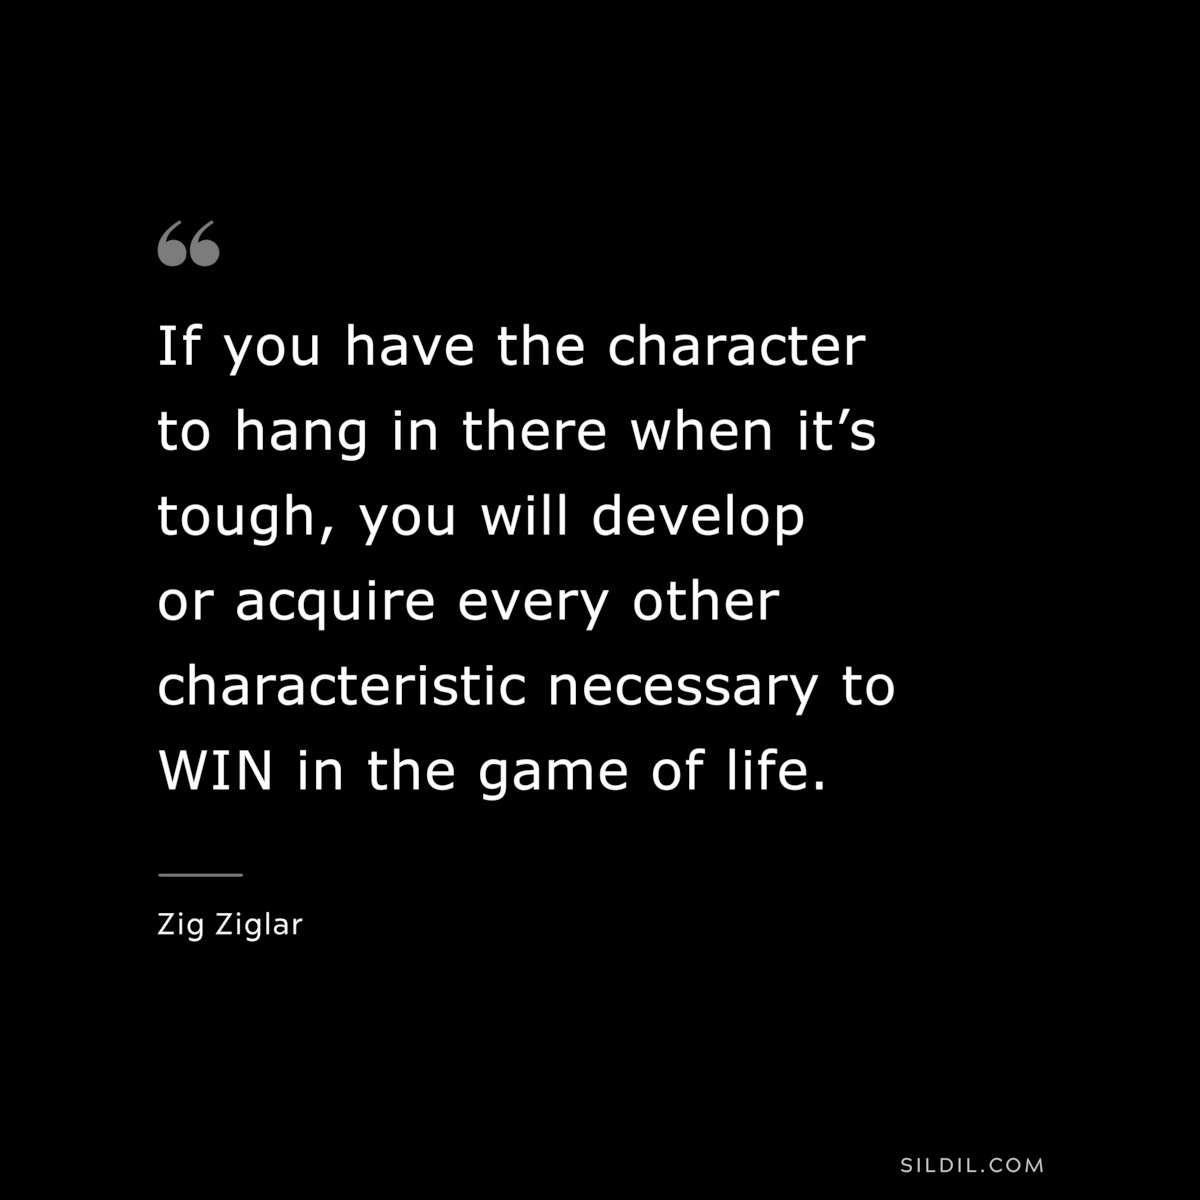 If you have the character to hang in there when it’s tough, you will develop or acquire every other characteristic necessary to WIN in the game of life. ― Zig Ziglar